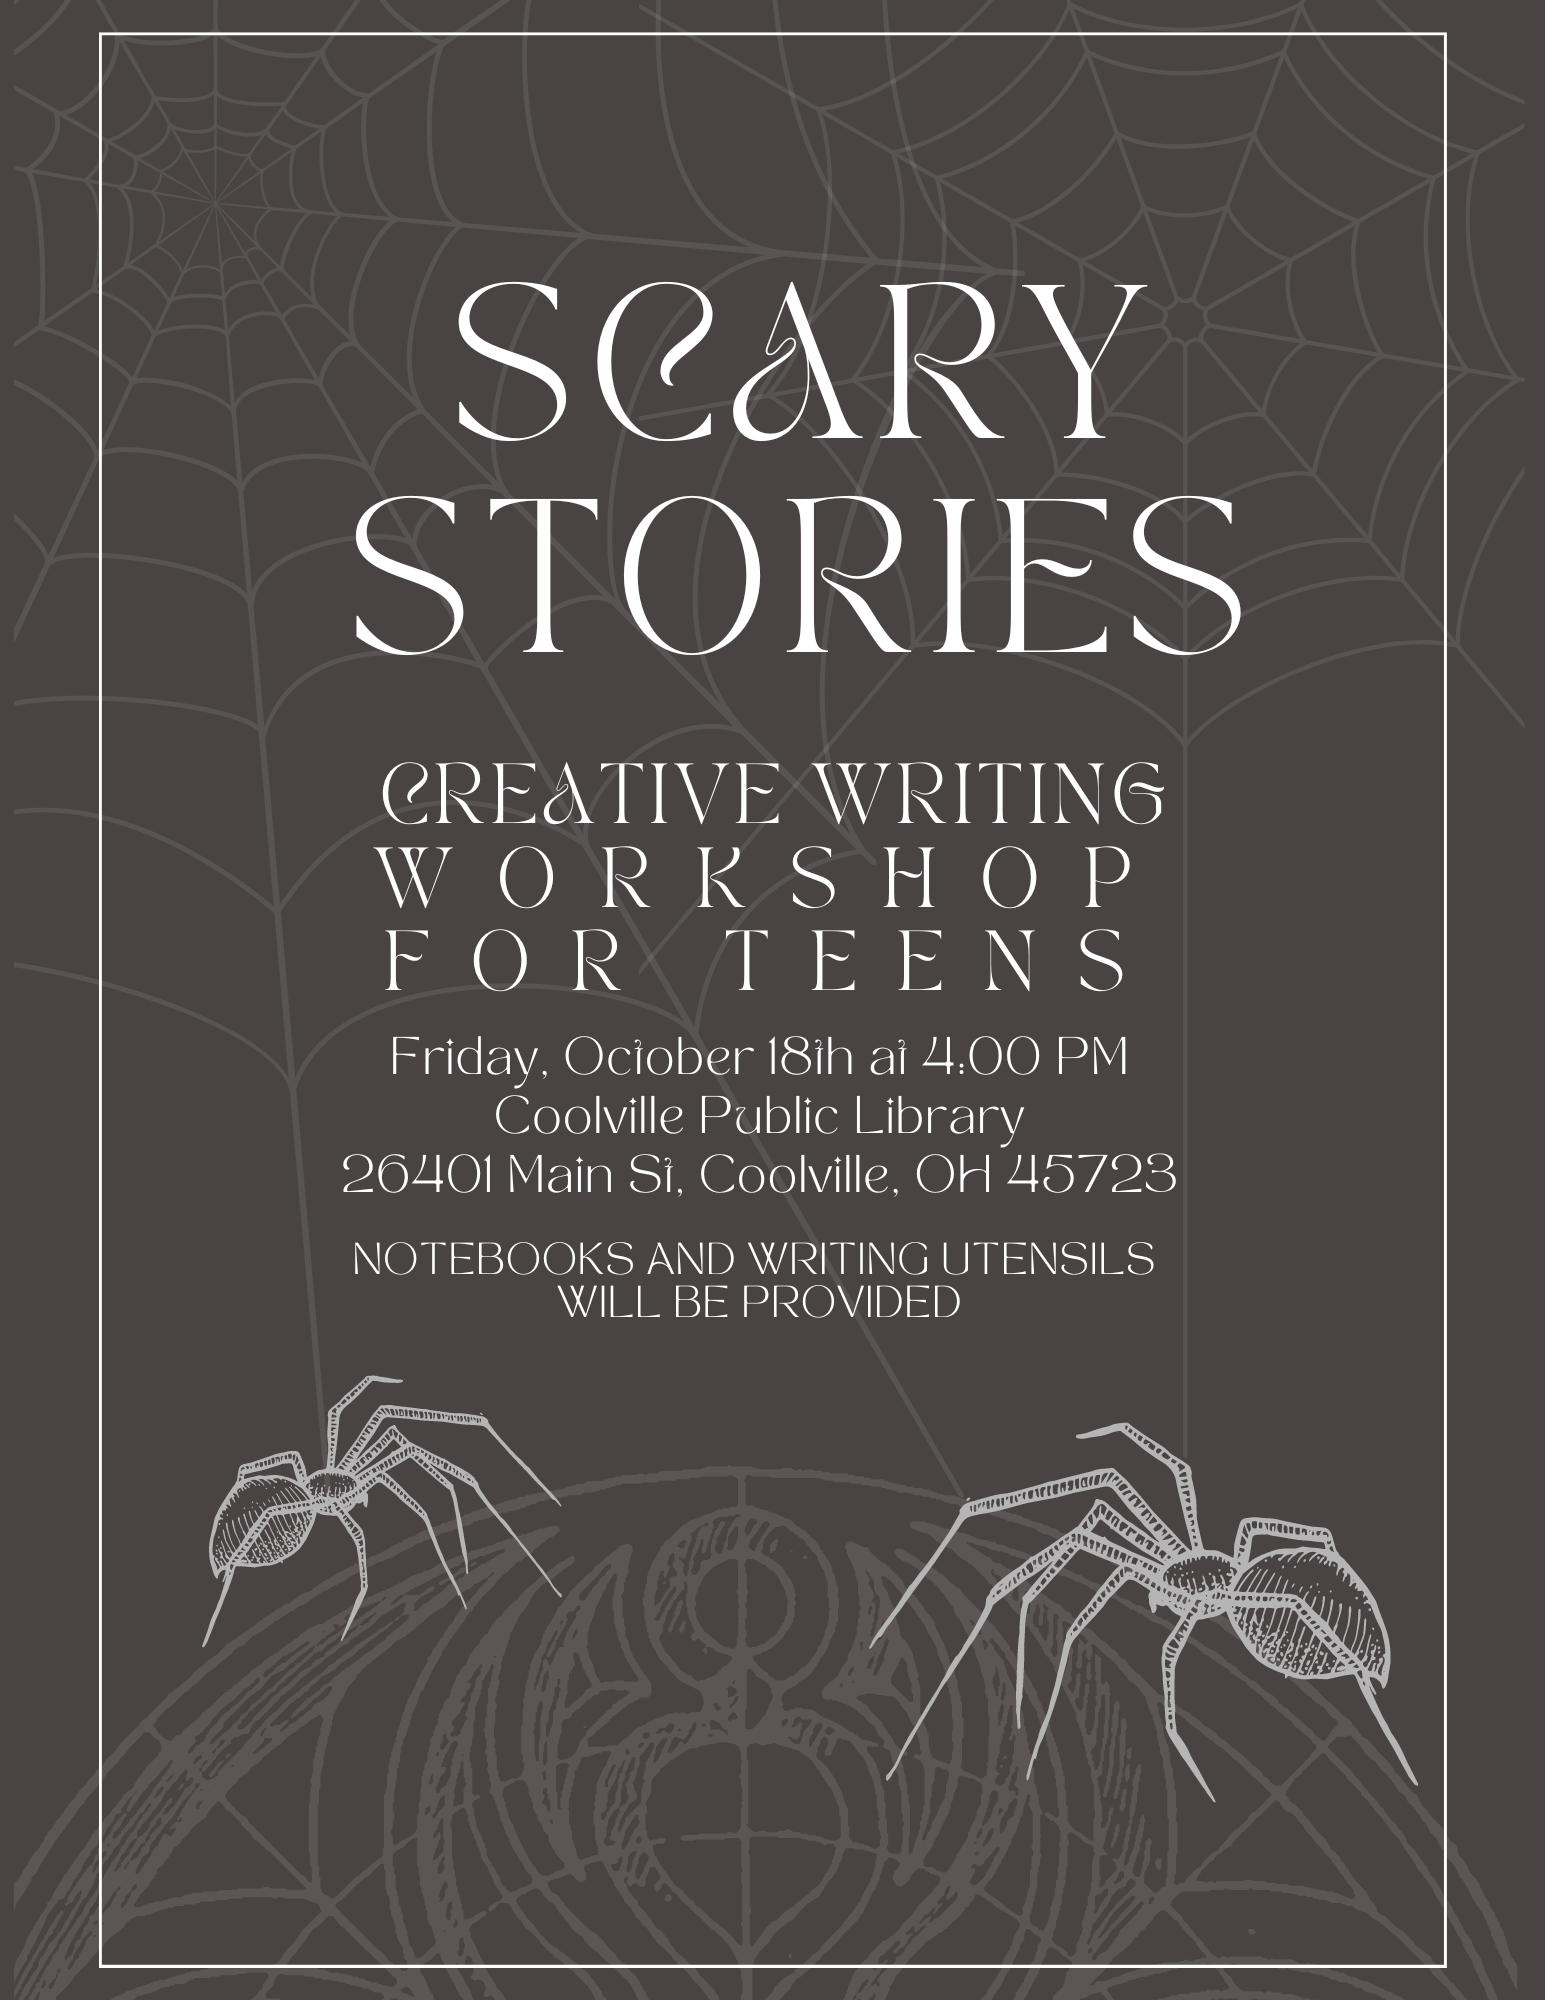 Drawn spiders on a black background that reads, "Scary Stories Creative Writing Workshop for Teens. Friday, October 18th at 4:00 PM Coolville Public Library 26401 Main St, Coolville, OH 45723. NOTEBOOKS AND WRITING UTENSILS  WILL BE PROVIDED"